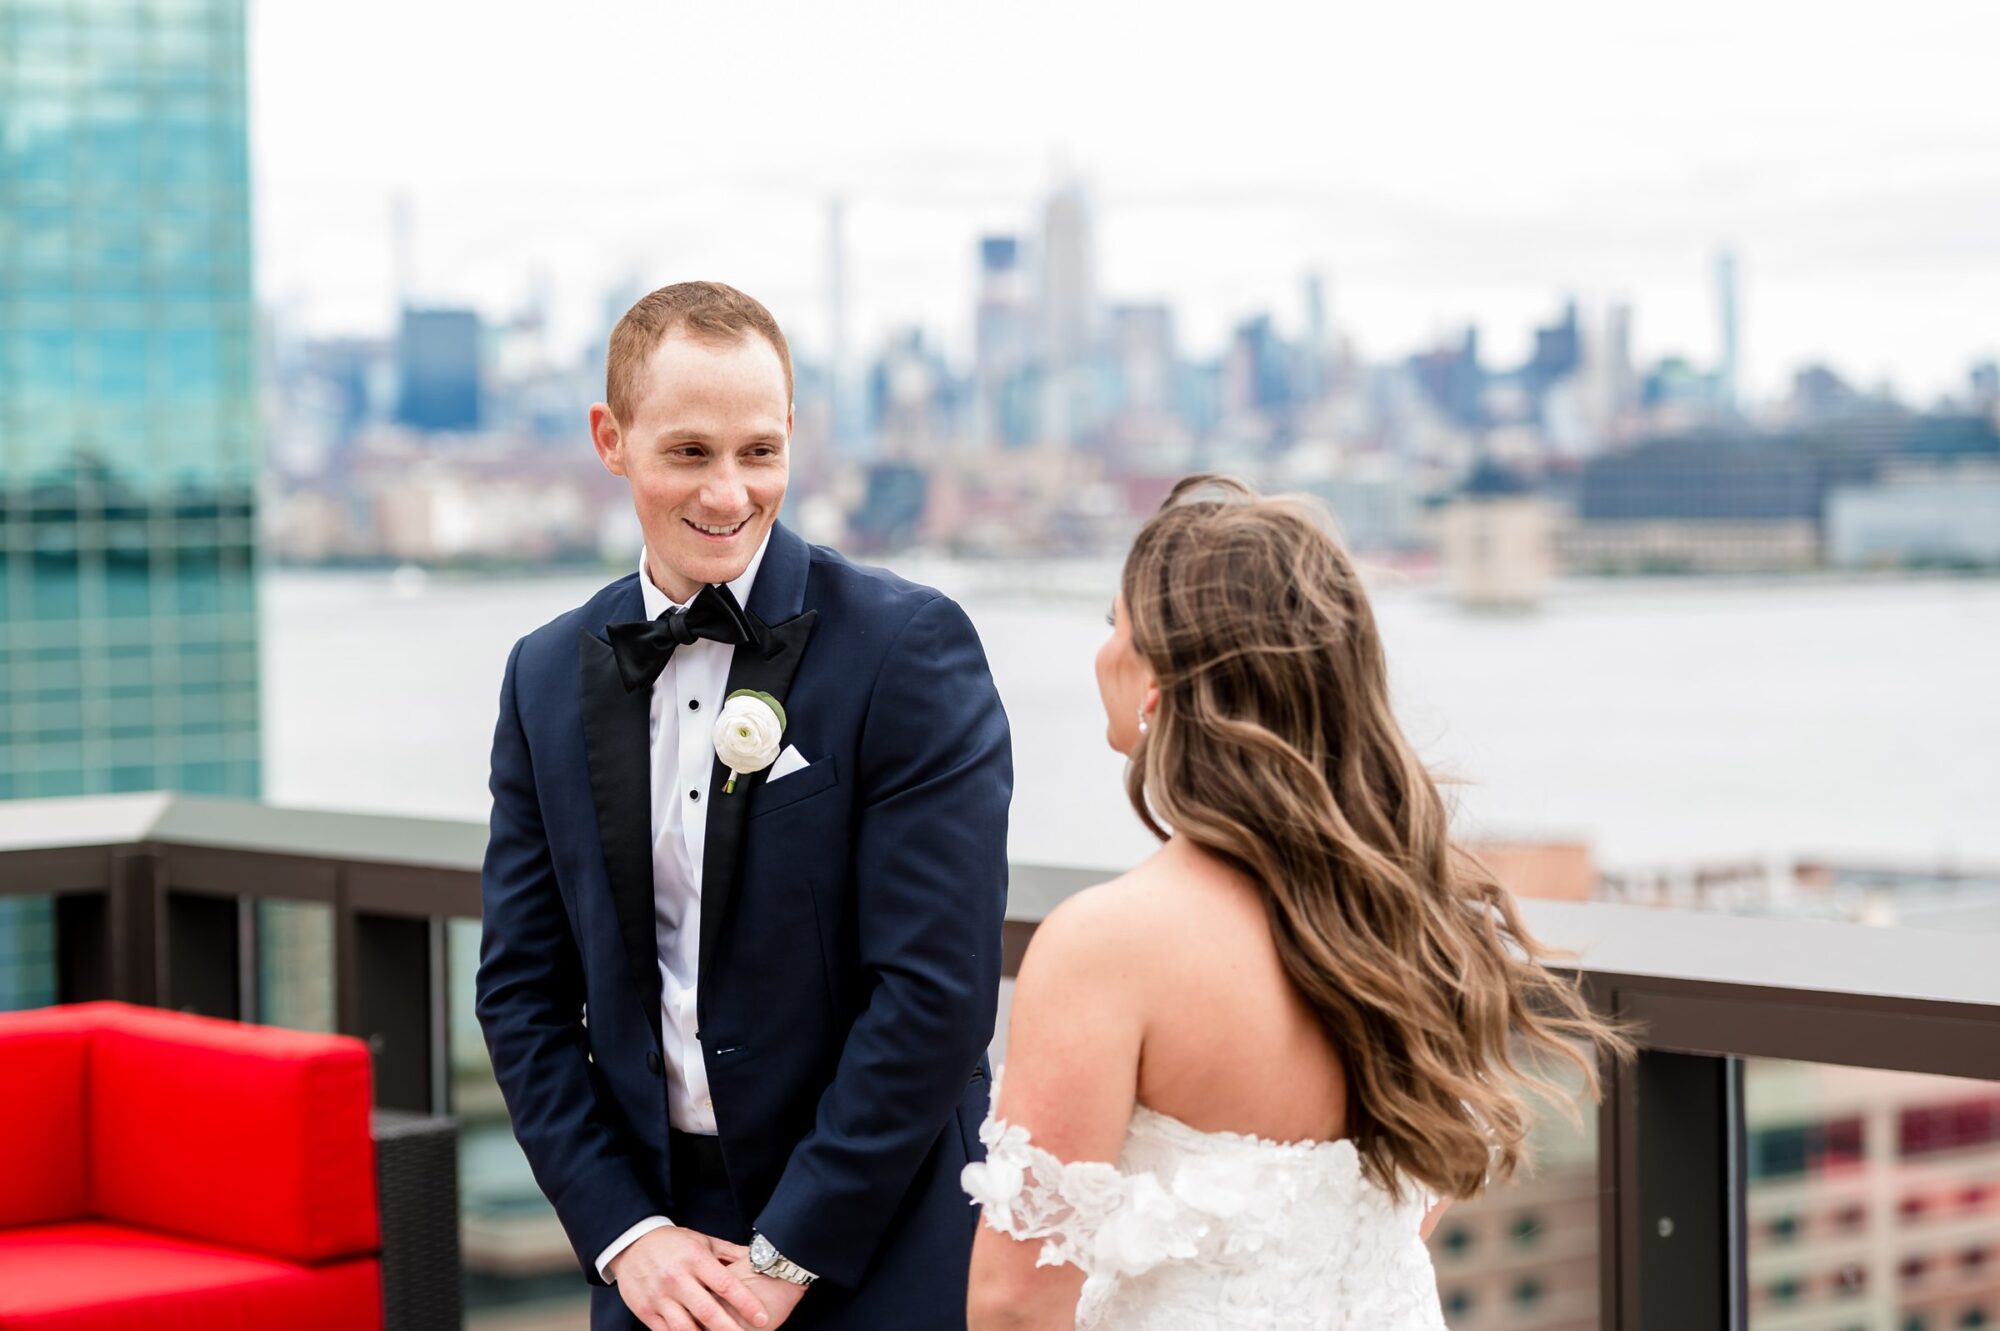 A bride and groom look at each other on a rooftop overlooking the city.